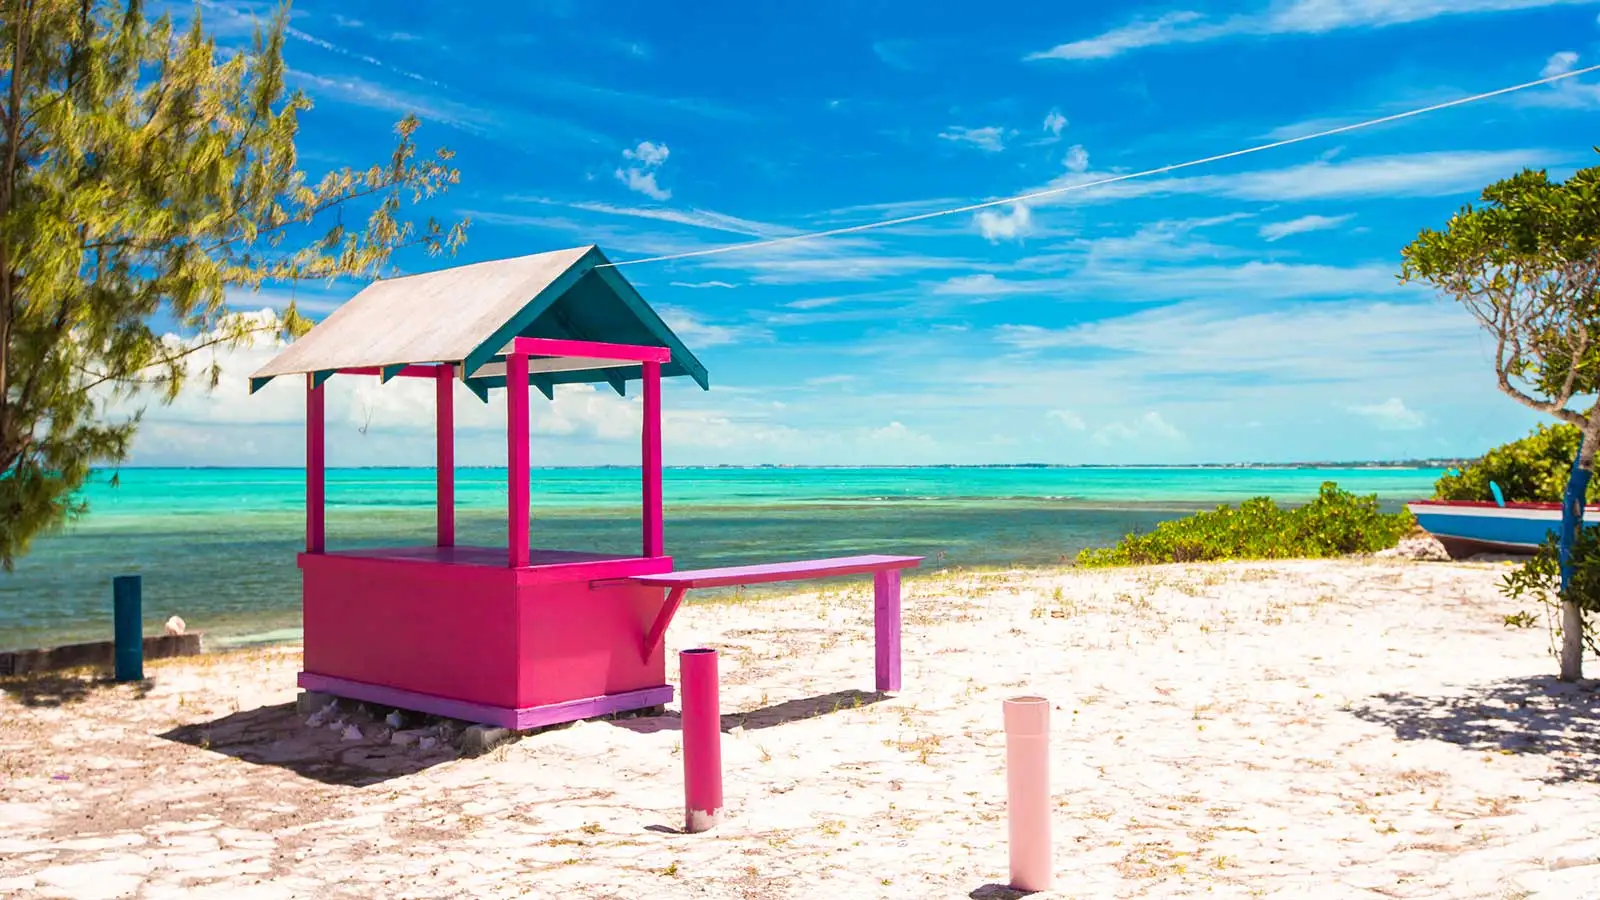 Flights to Turks and Caicos